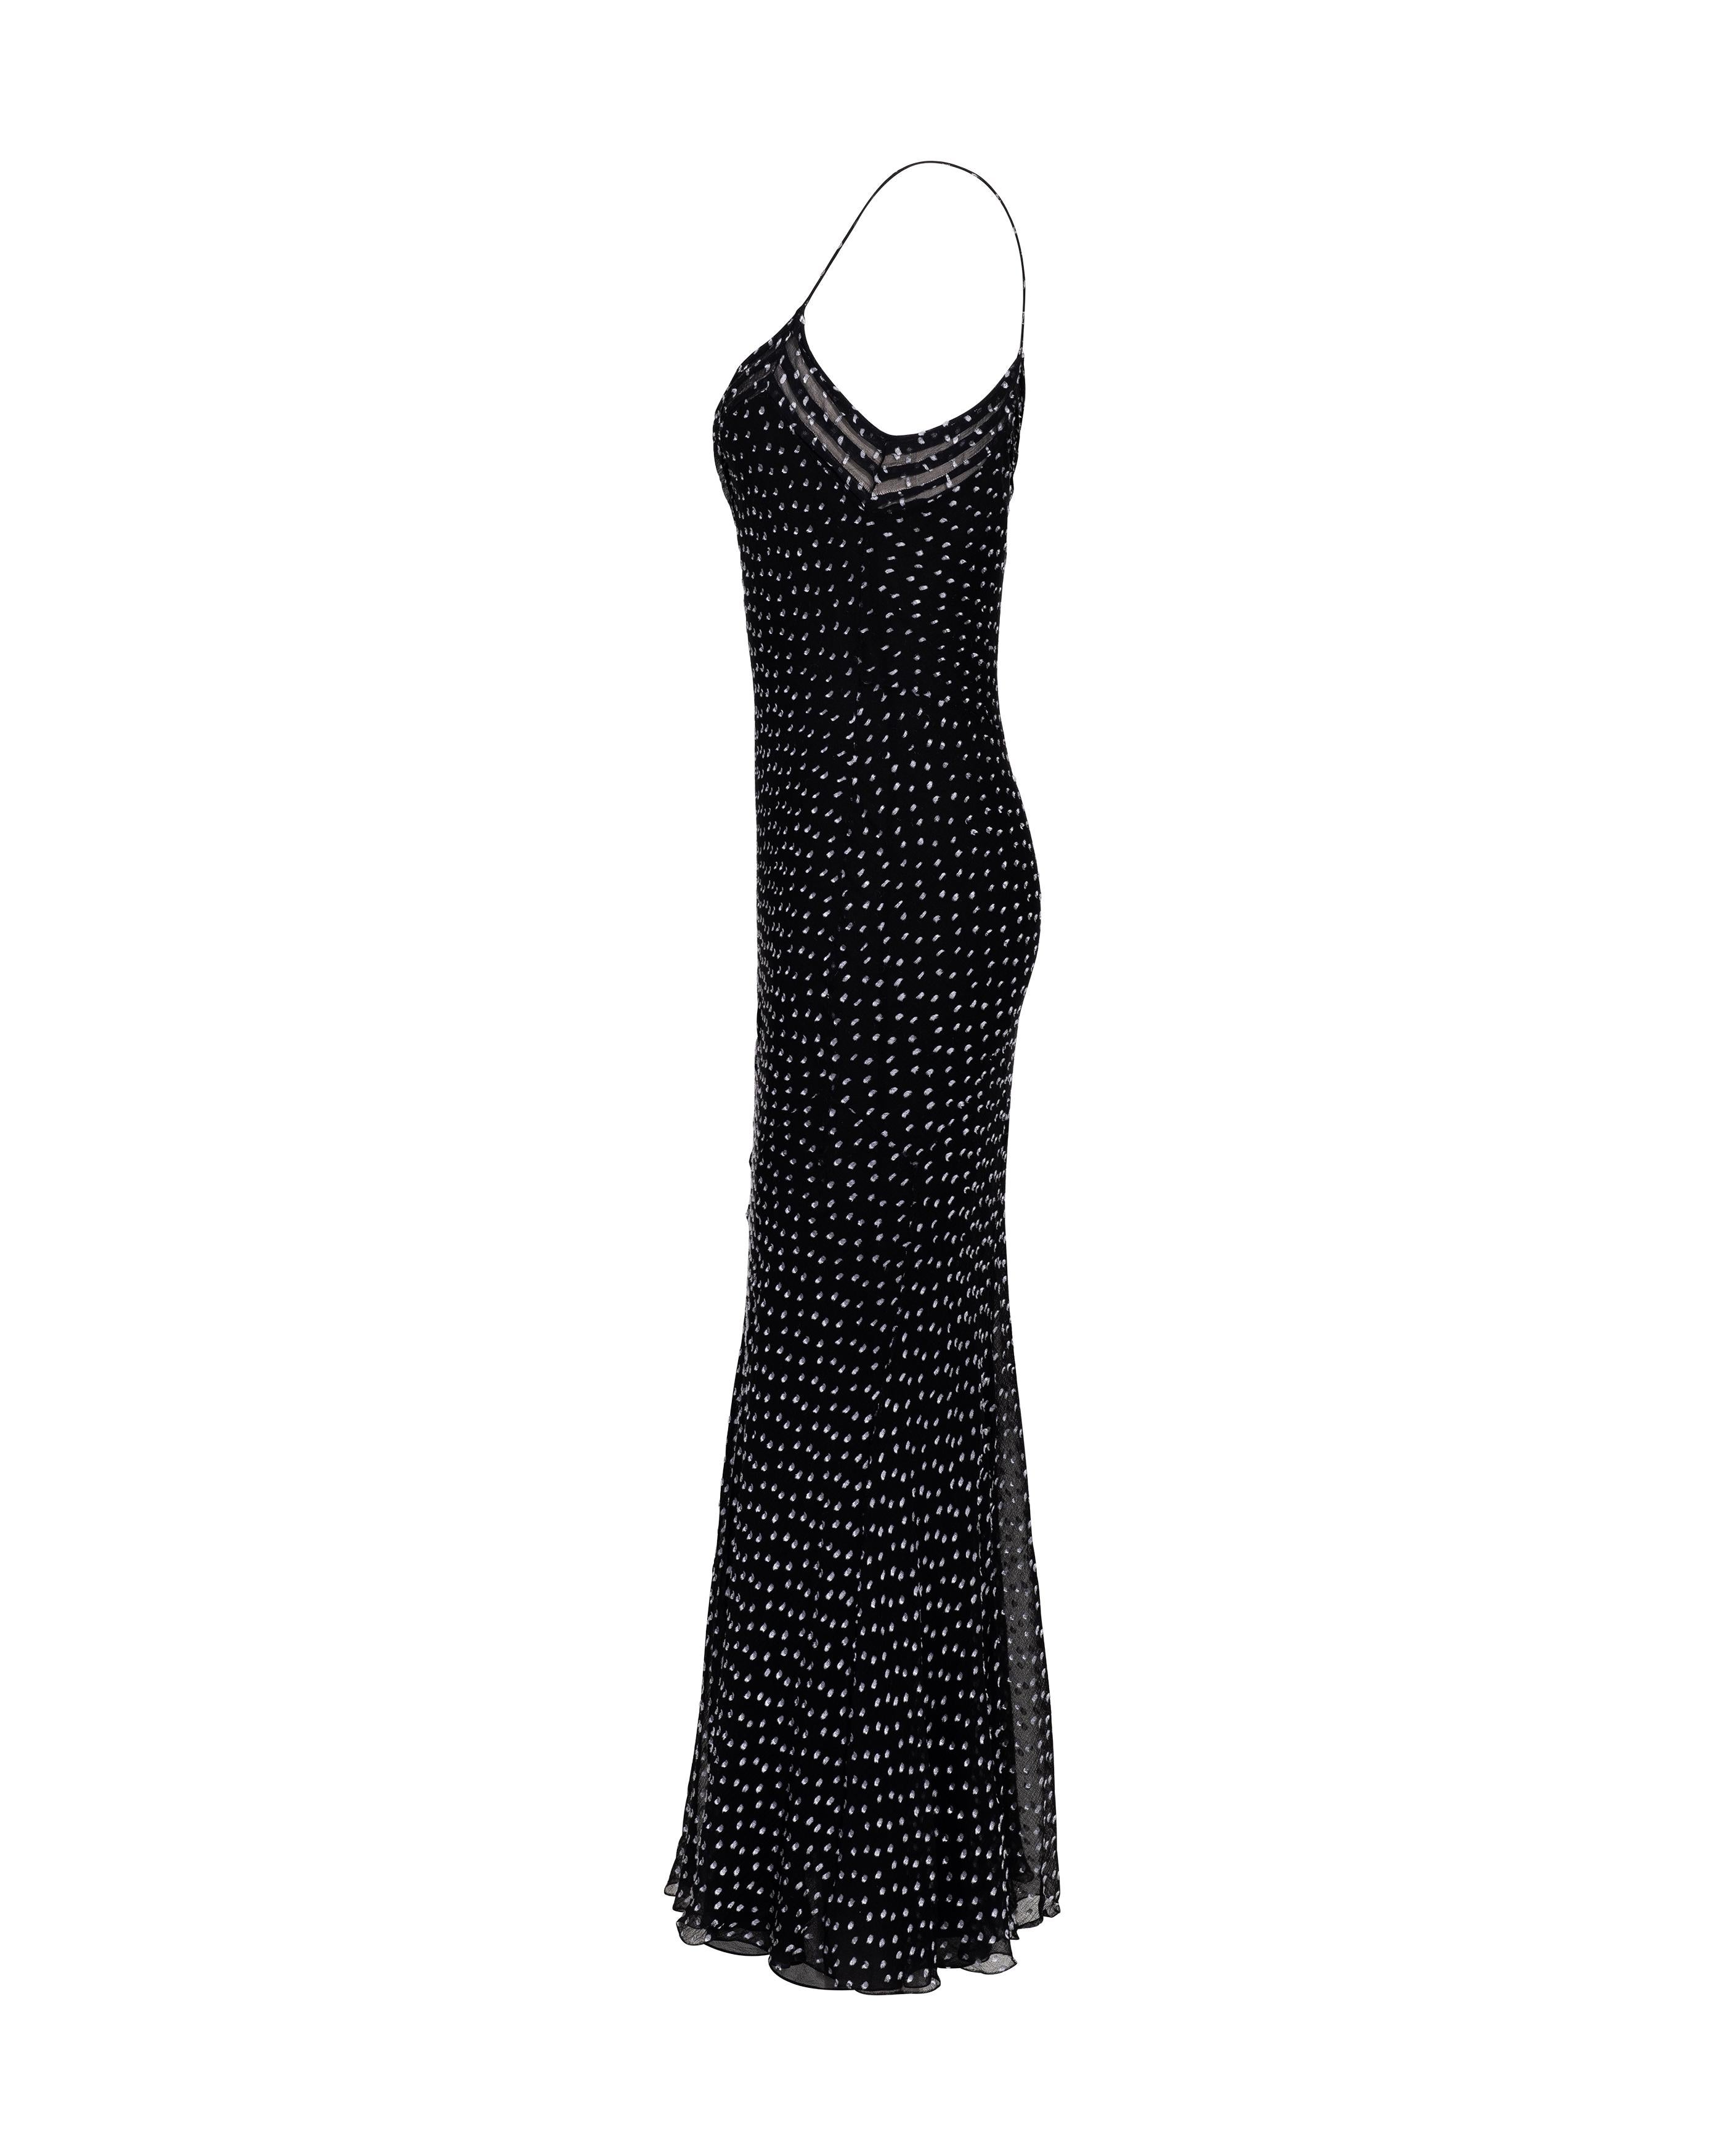 A/W 1999 John Galliano Bias Cut Black and White Polka Dot Slip Gown In Good Condition In North Hollywood, CA